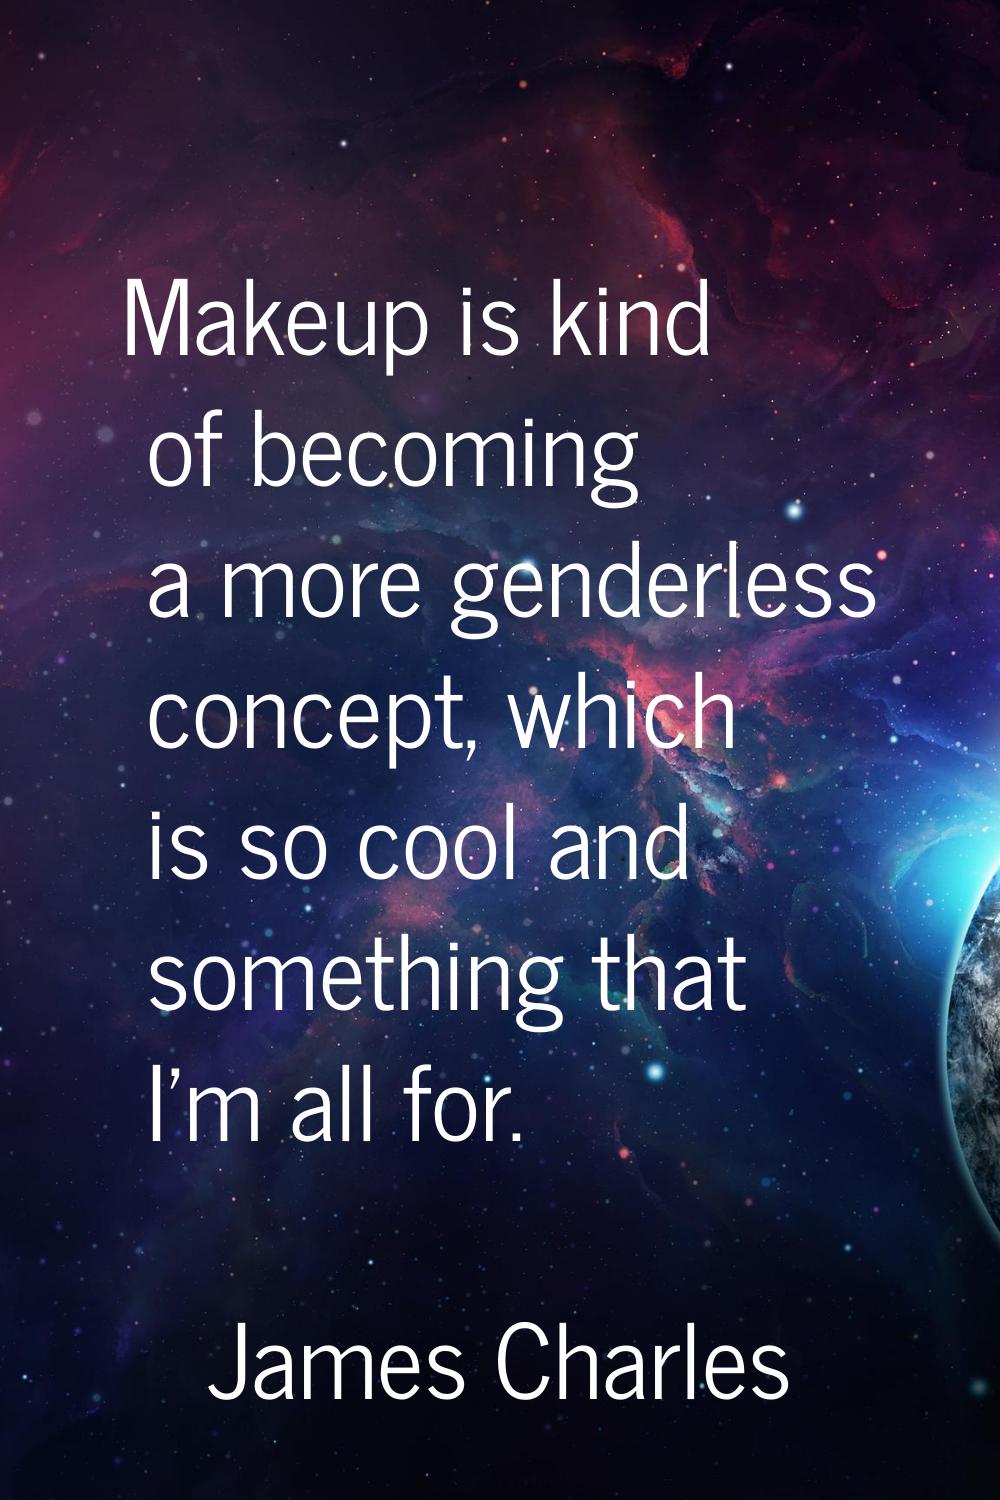 Makeup is kind of becoming a more genderless concept, which is so cool and something that I'm all f